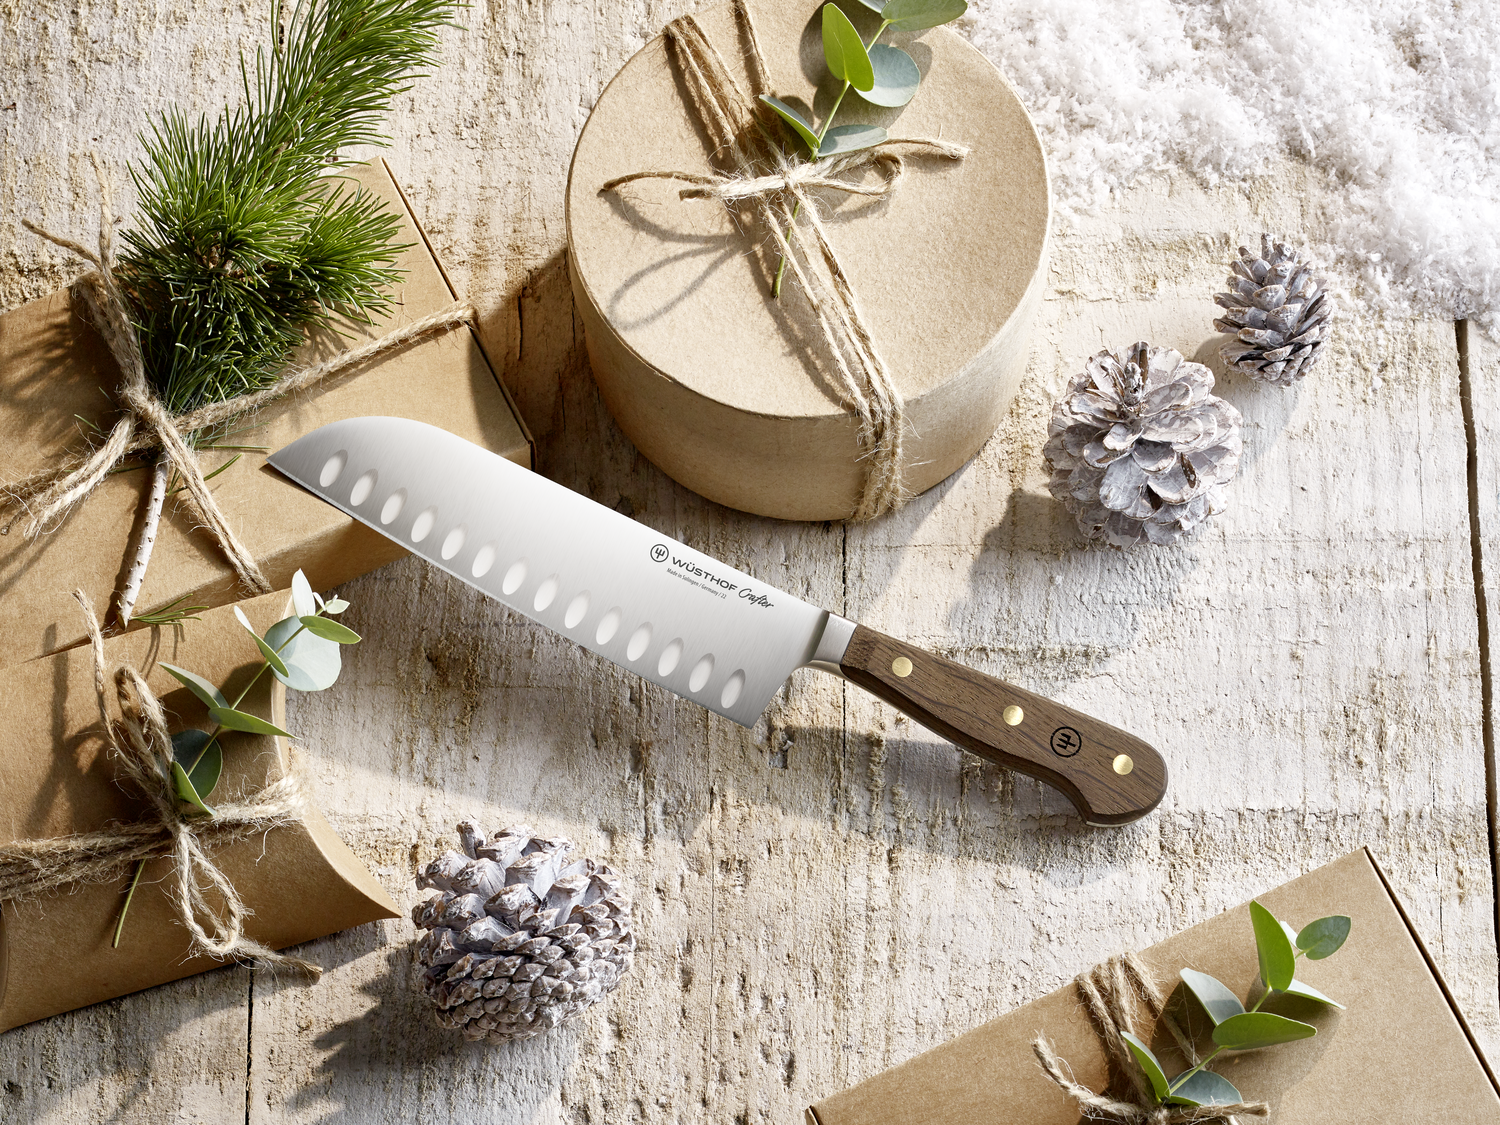 WÜSTHOF Crafter Santoku with presents wrapped in brown paper